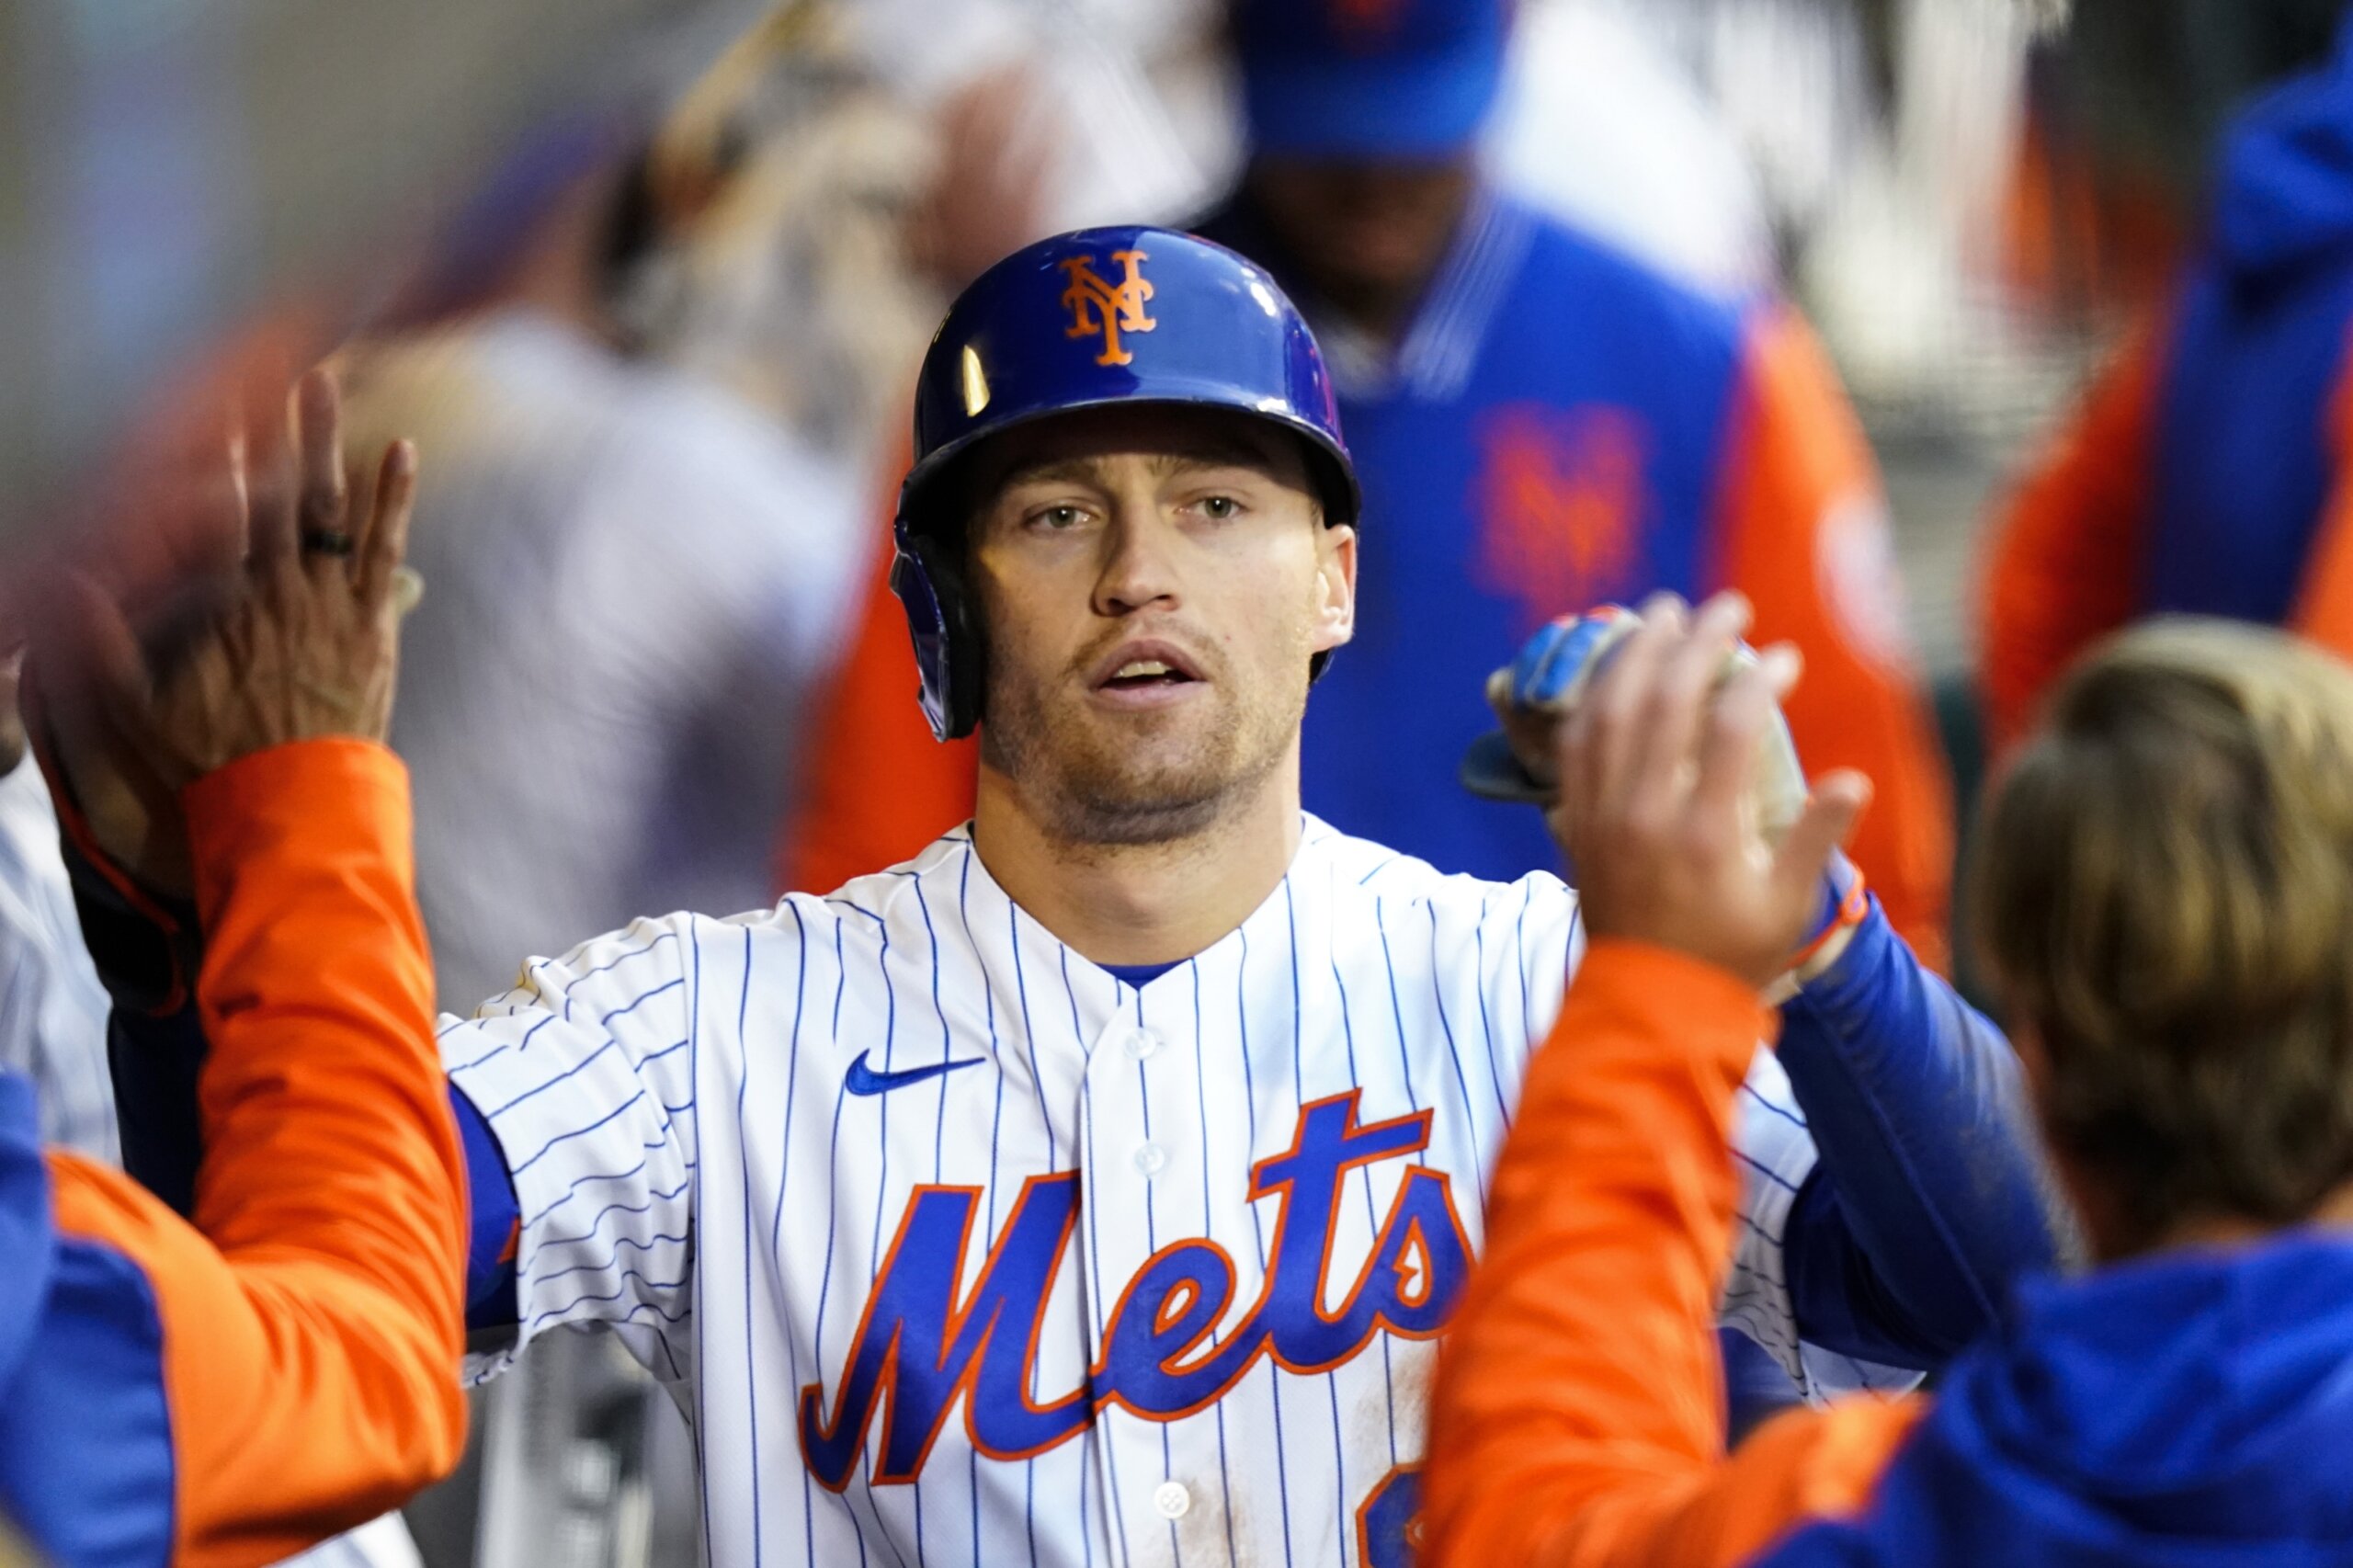 Mets drop 4th straight game after Nationals shut down offense again, National Sports